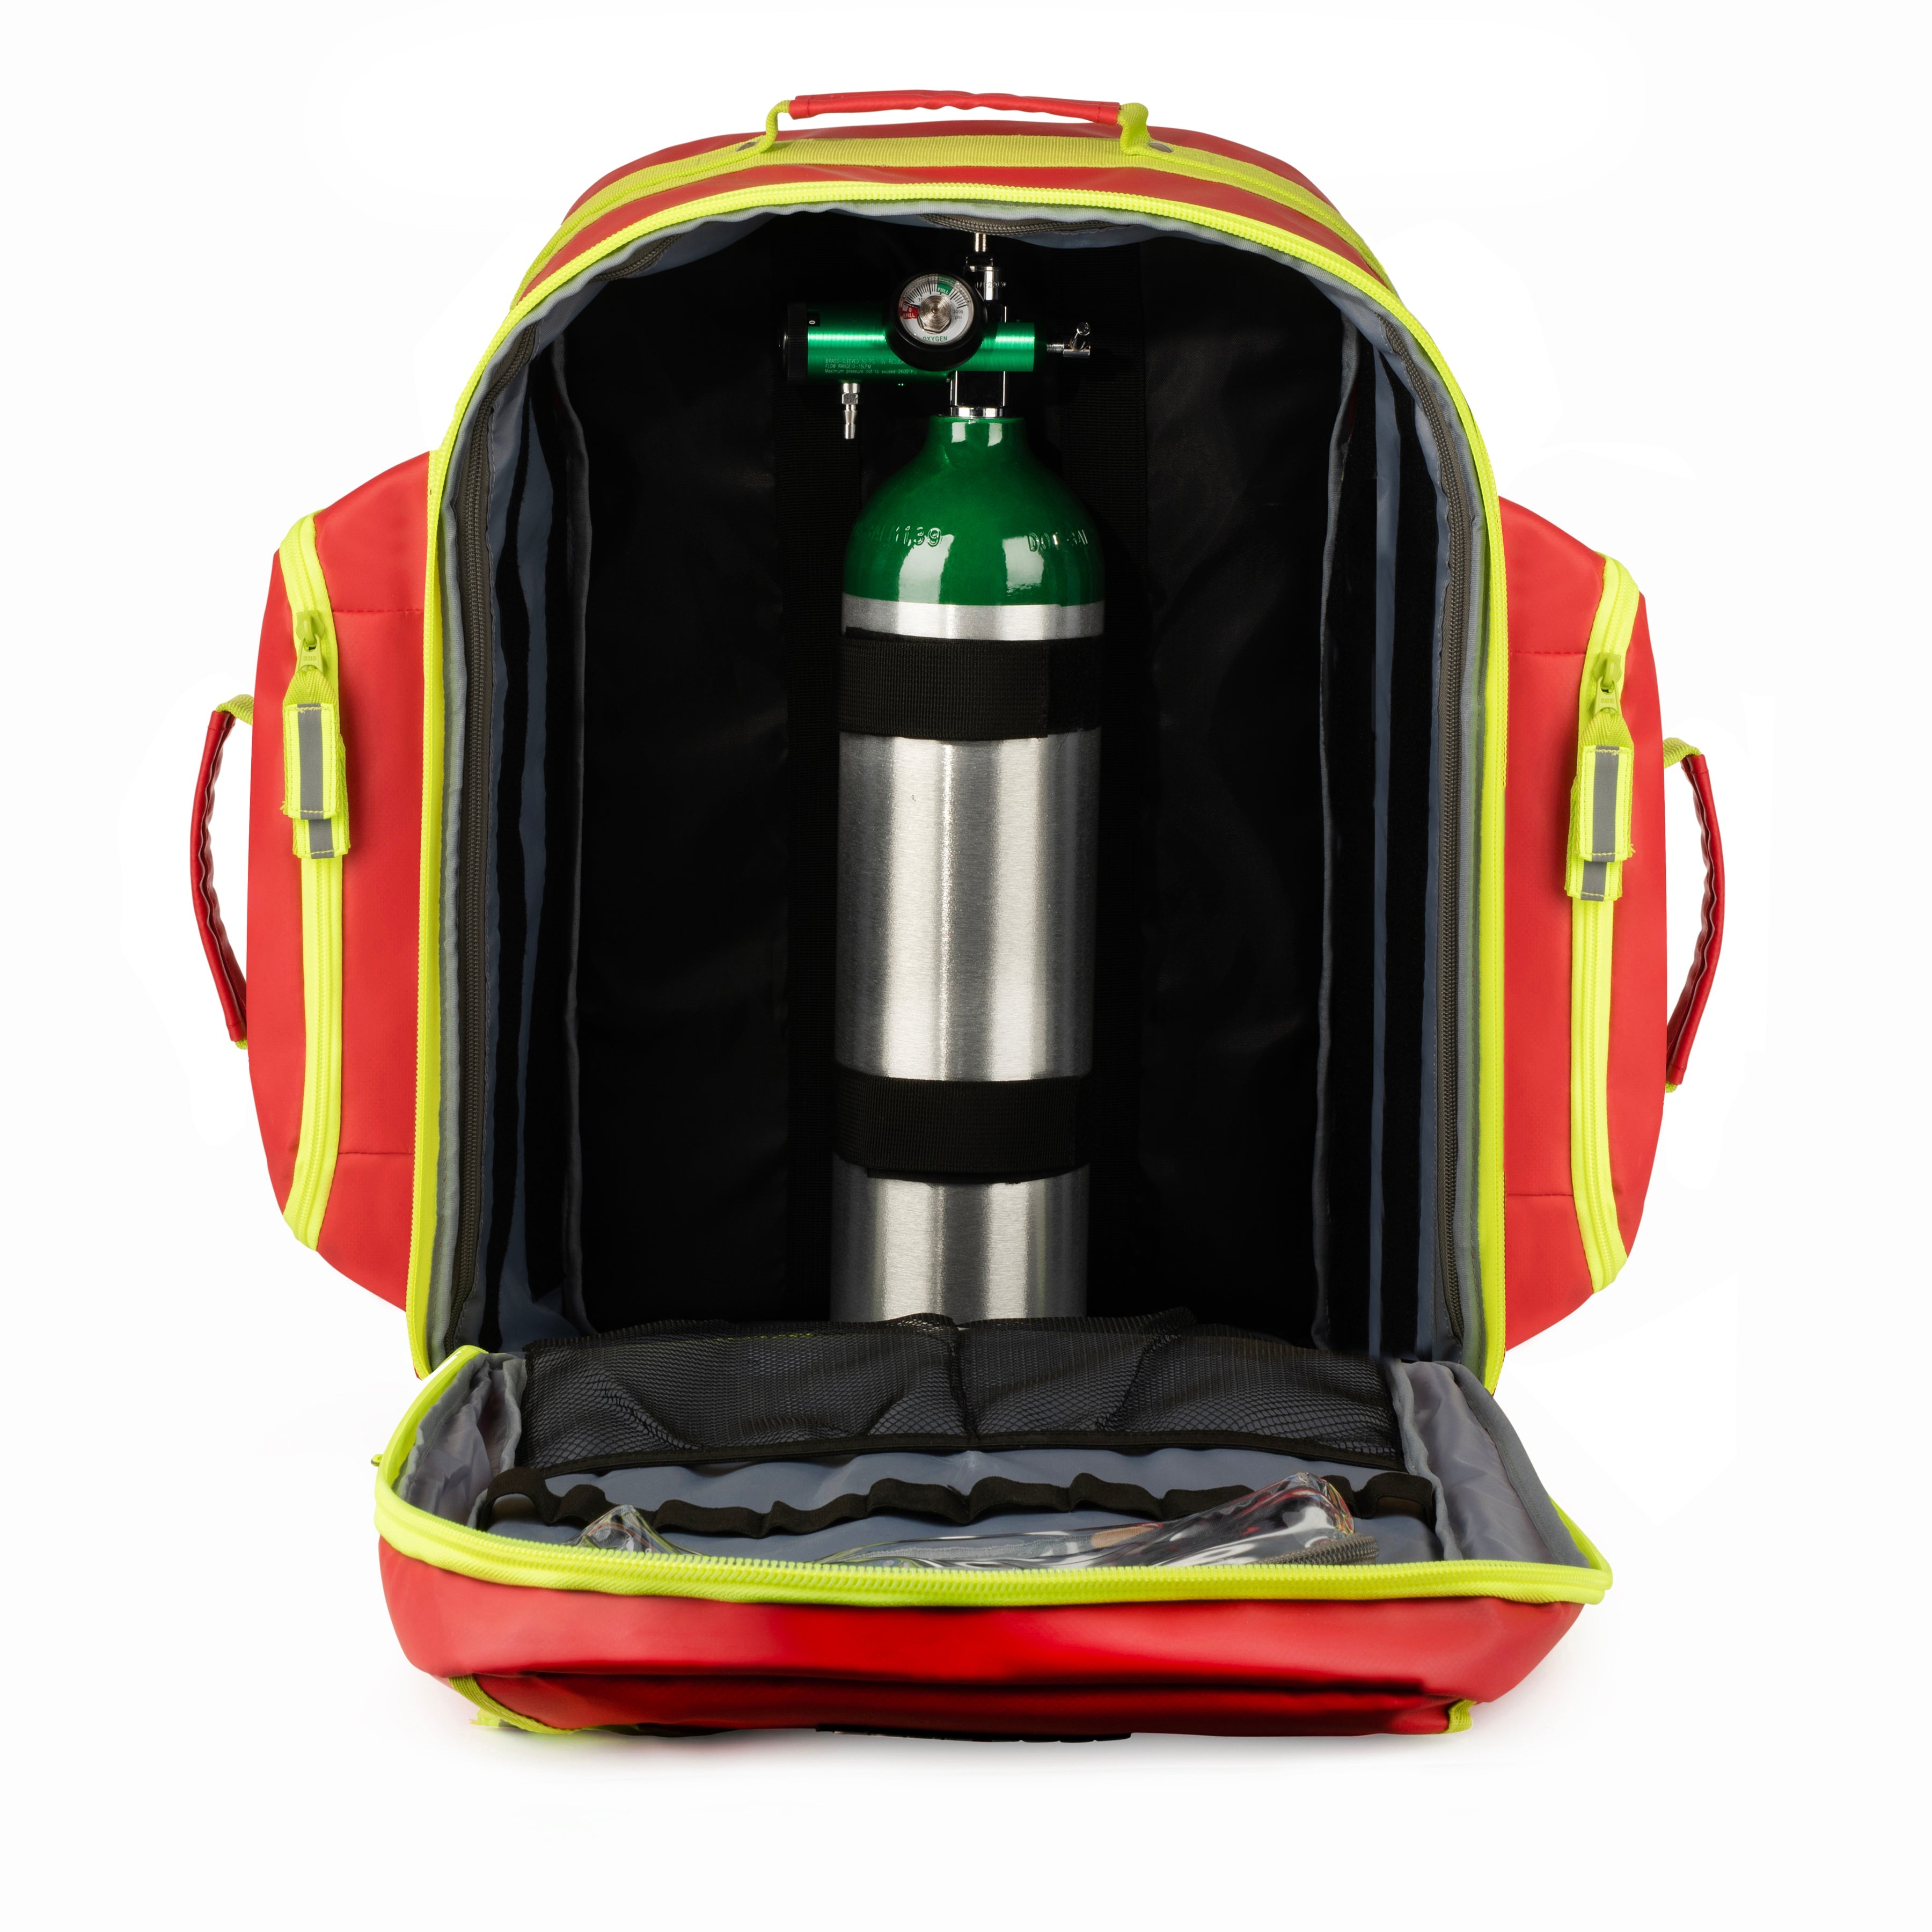 Scherber Ultimate First Responder Trauma O2 Backpack W/Bleeding Control - Fully Stocked